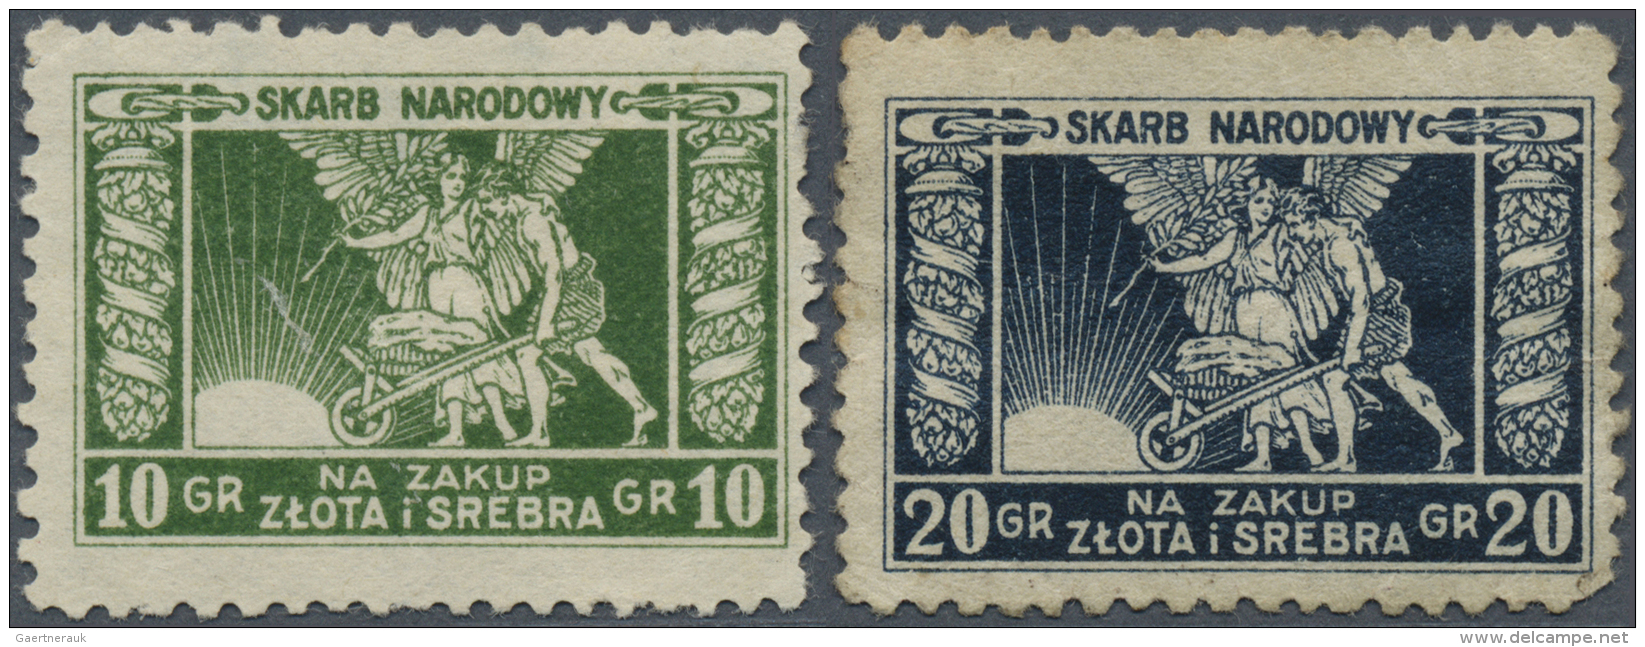 Poland / Polen: Set Of 2 Stamp Issues Skarb Narodowy From 10 And 20 Groszy, P. NL Without Date (1920-24), Condition: XF. - Pologne